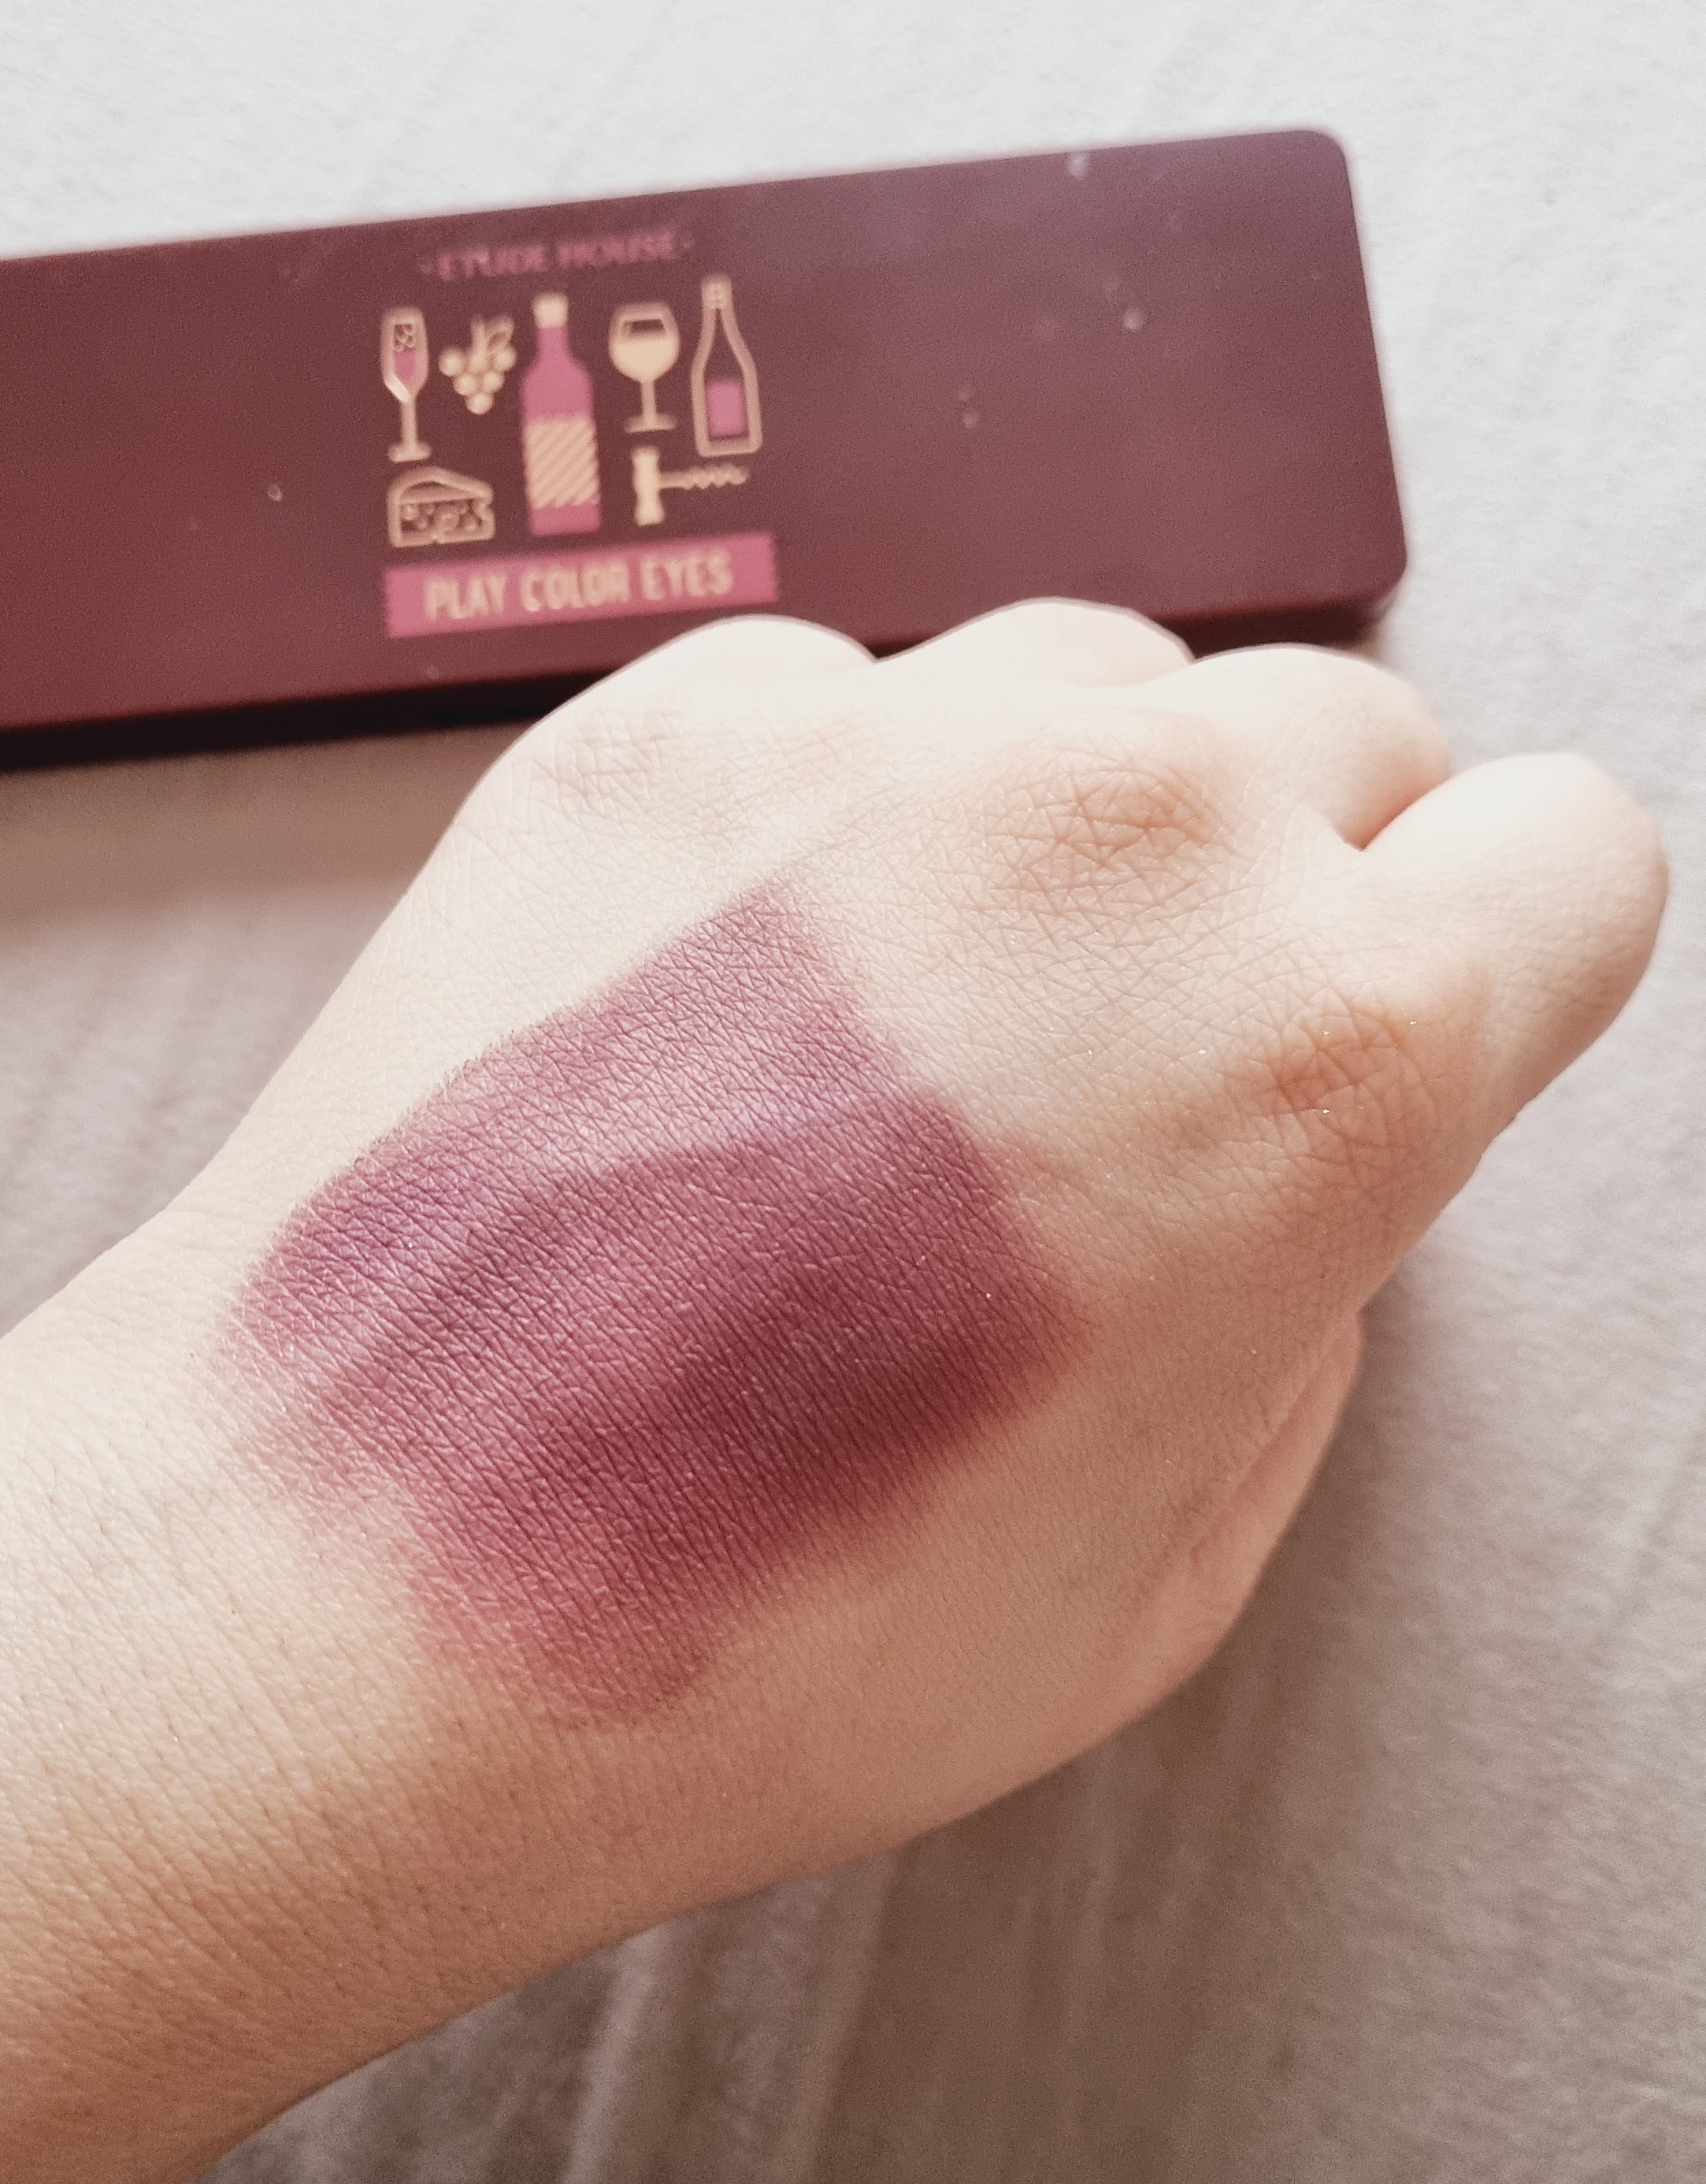 Etude House Play Color Eyes Wine Party - Bordeaux Wine